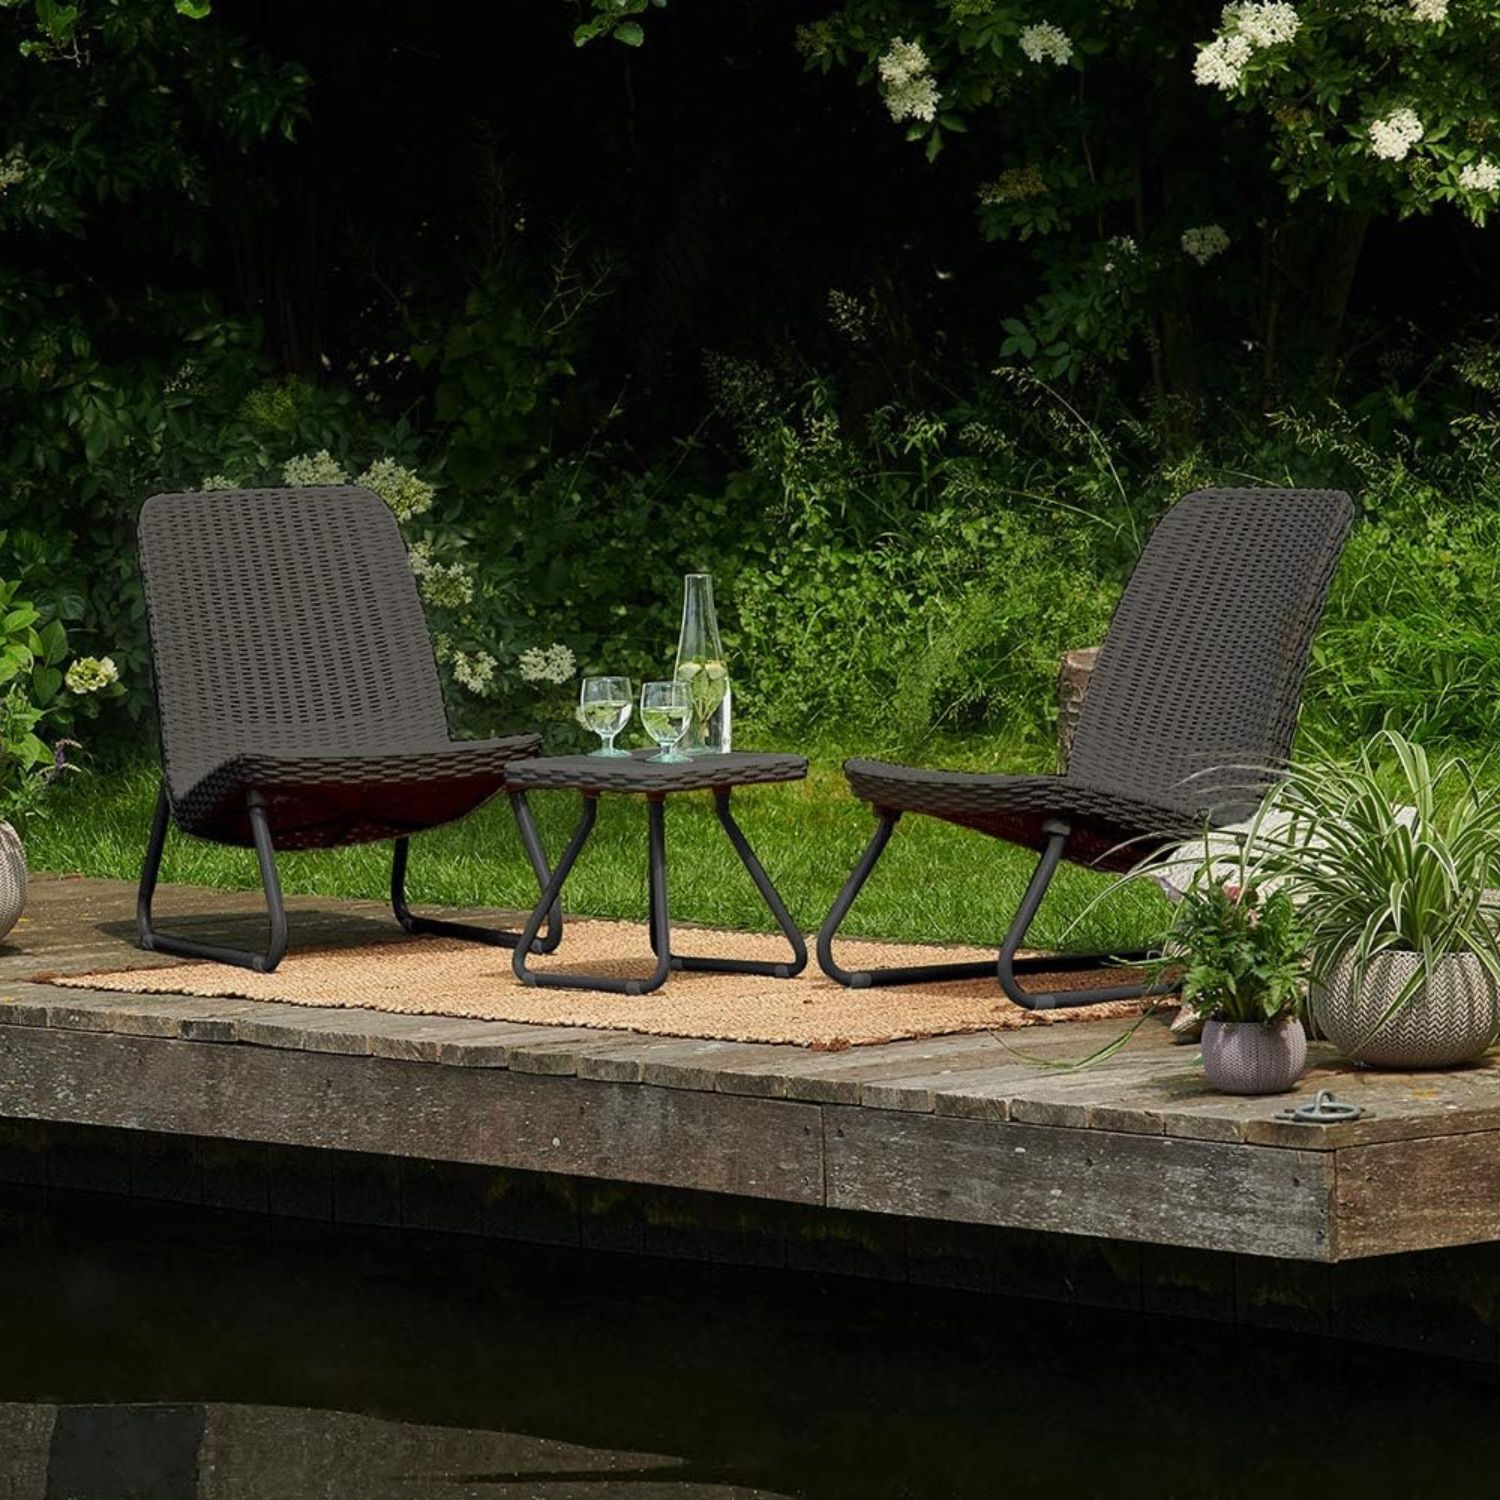 The Best Cheap Outdoor Patio Furniture Option: Keter Rio 3-Piece Patio Seating Set